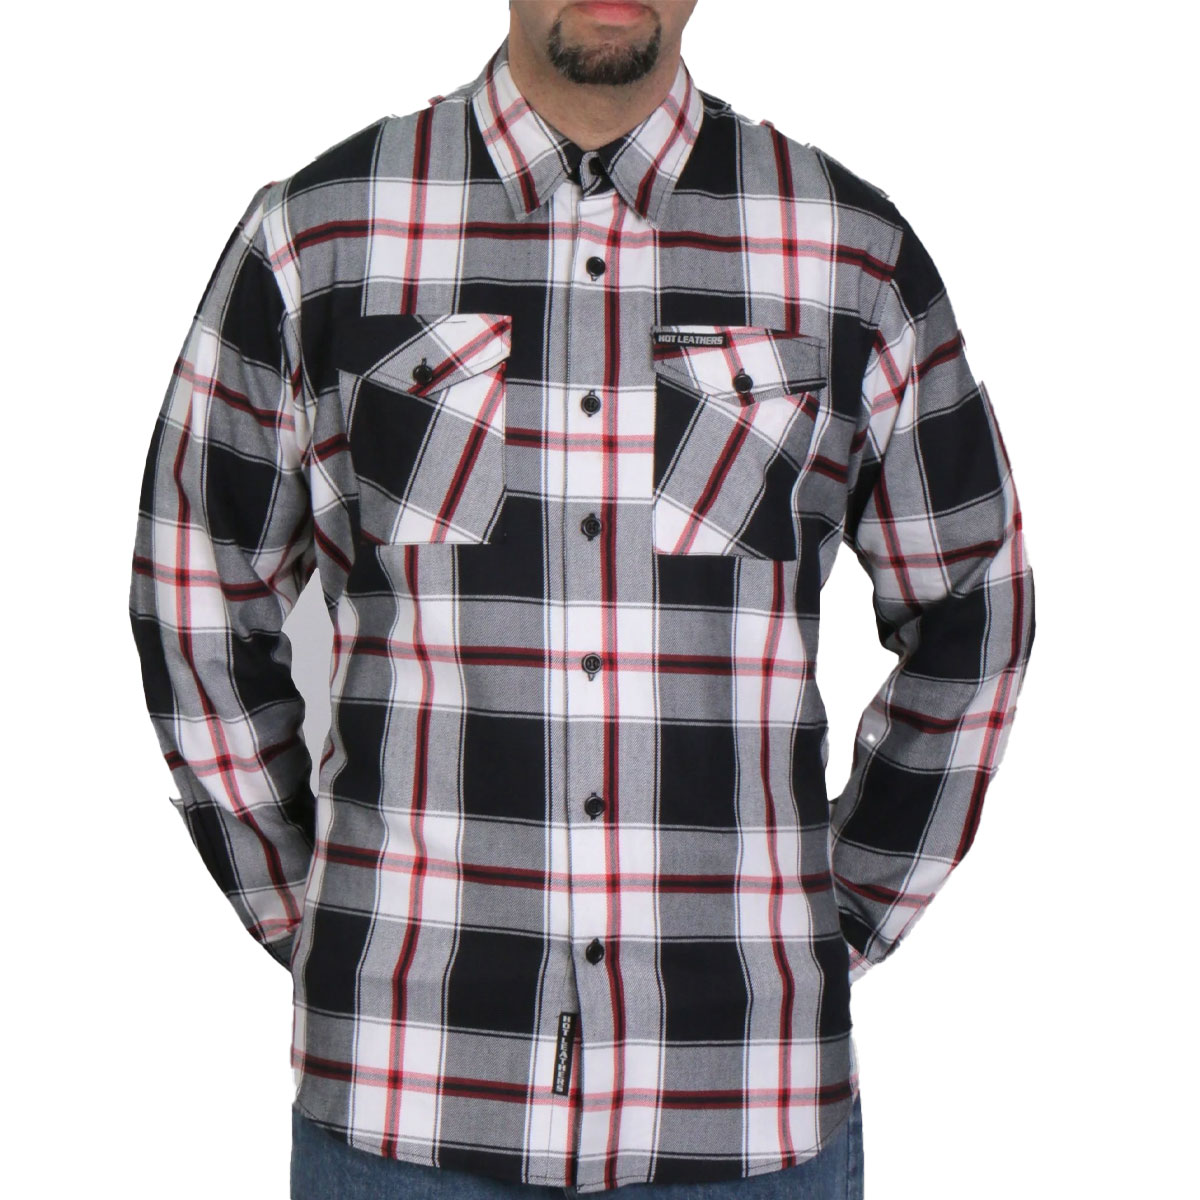 Men's Motorcycle Gear – Milwaukee Motorcycle Clothing Co